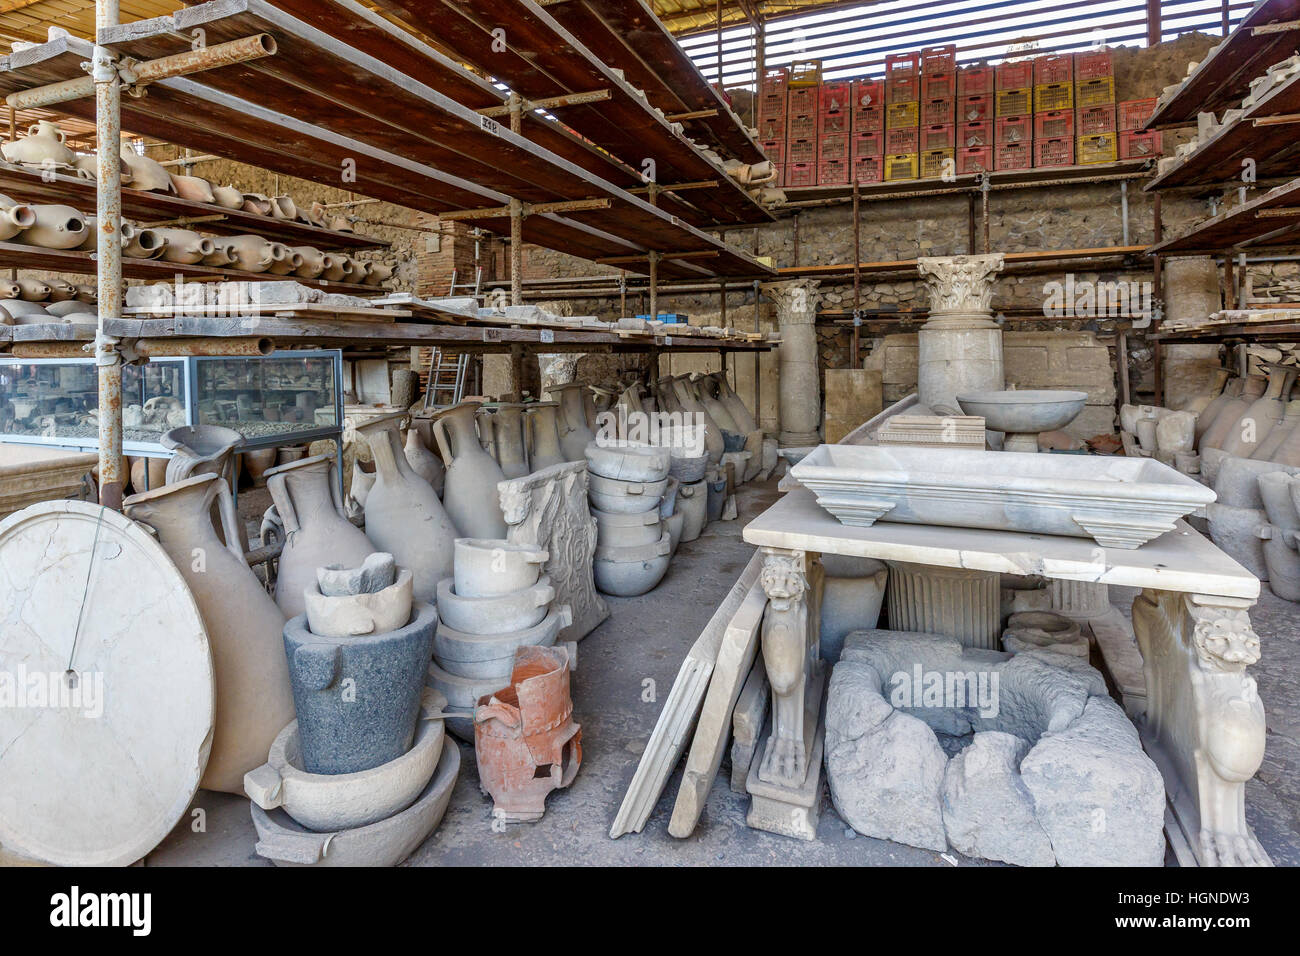 Storage facility for artifacts at the archaeological site of Pompeii, Campania, Southern Italy. UNESCO World Heritage Site. Stock Photo